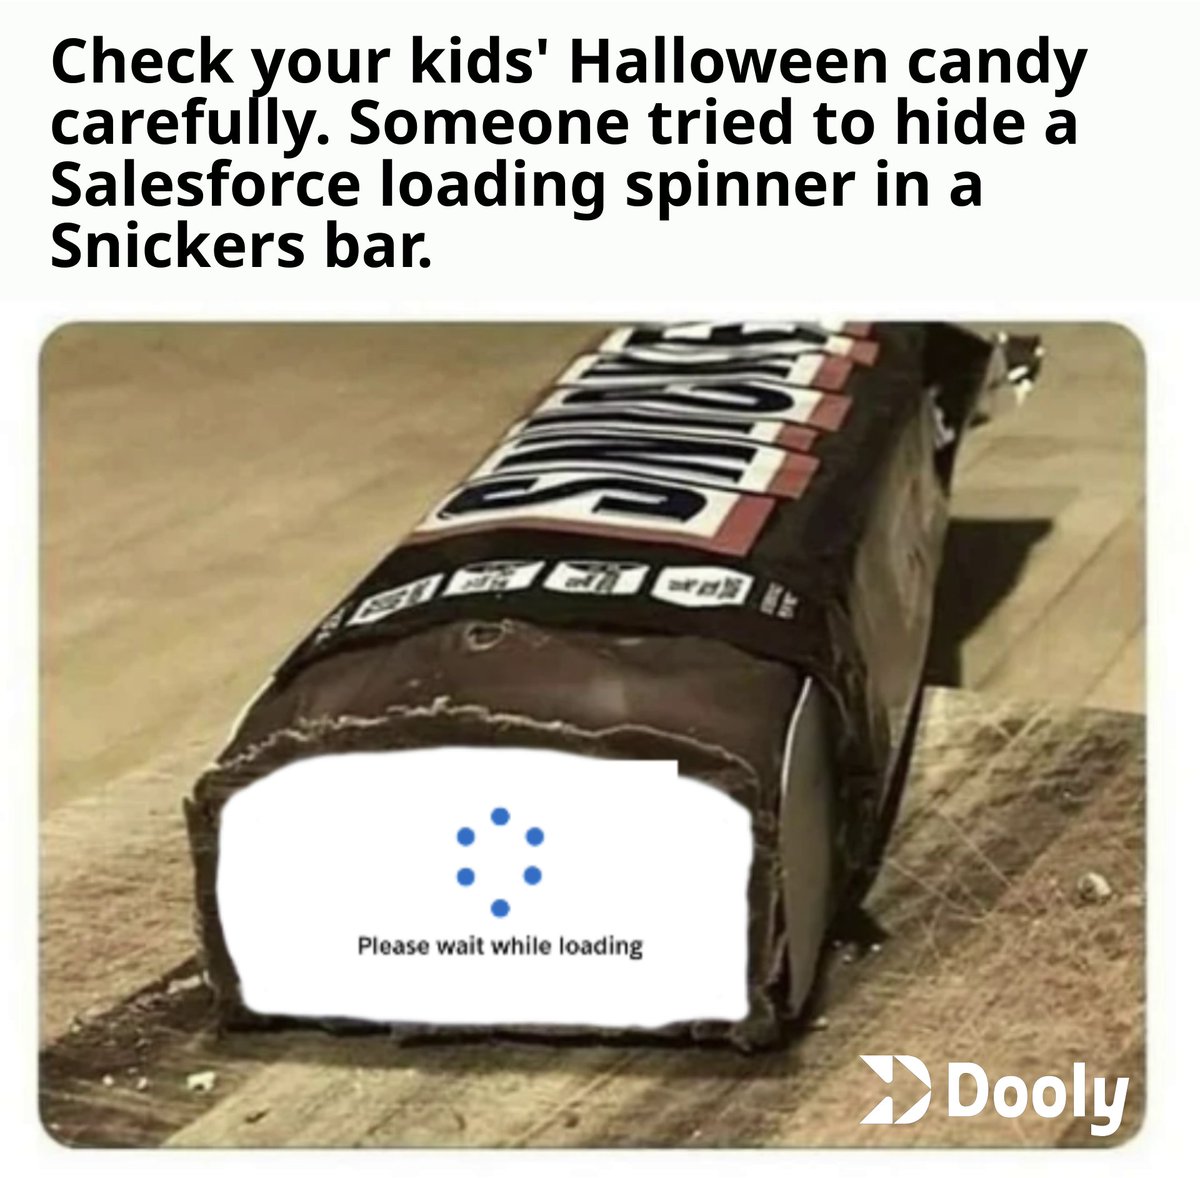 'Mom, what is that?' 'That's the spinning wheel of death sweety, don't touch it!' Dooly is the Sales AI that AEs need ASAP. It eliminates SFDC stress so you can hit OTE without working OT. (That's a lot of acronyms, but you get the idea.)